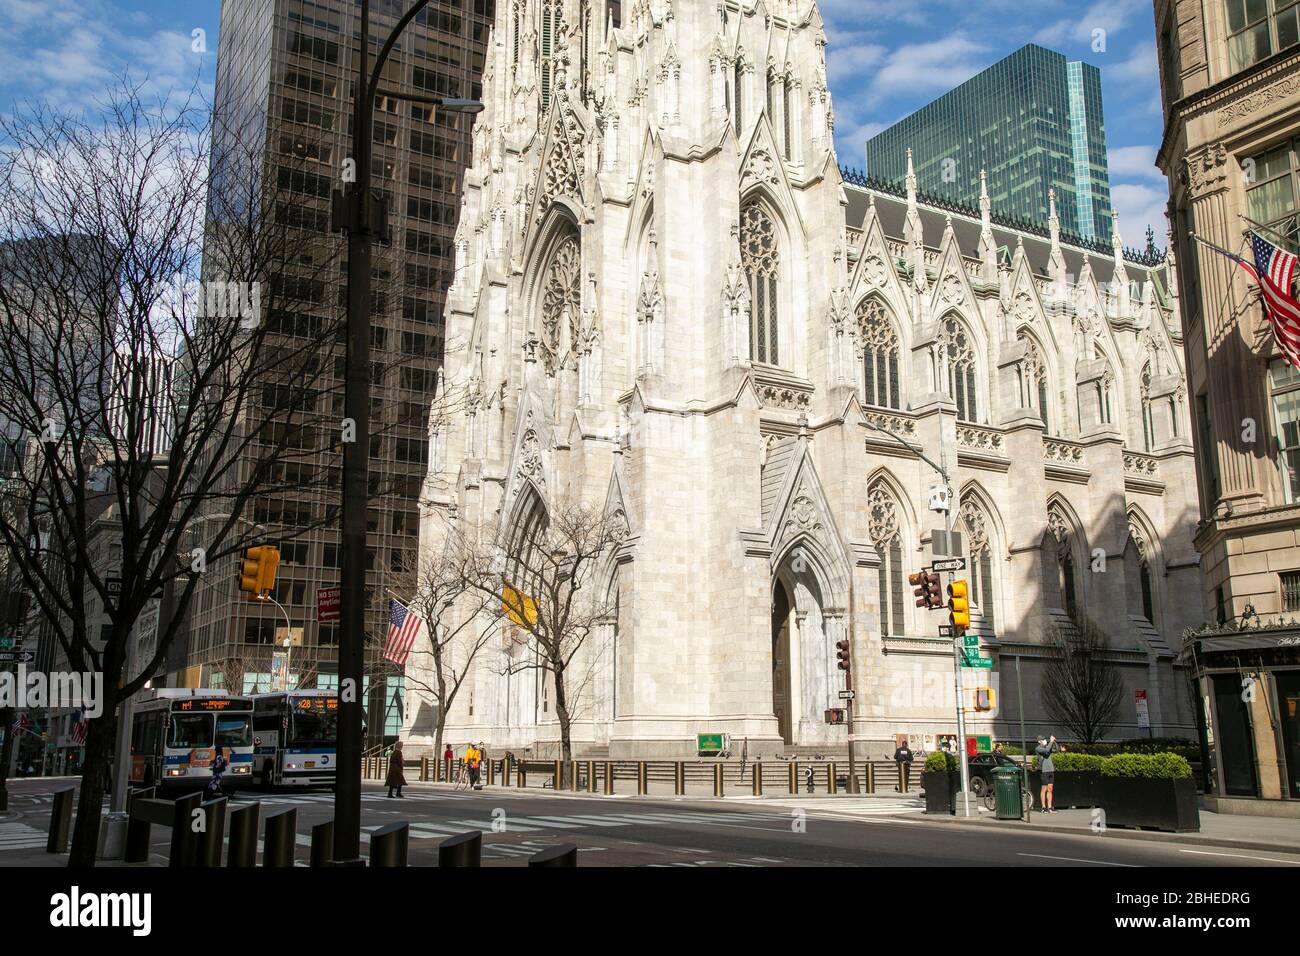 St. Patrick's Cathedral, 5th Avenue, New York City. Stockfoto